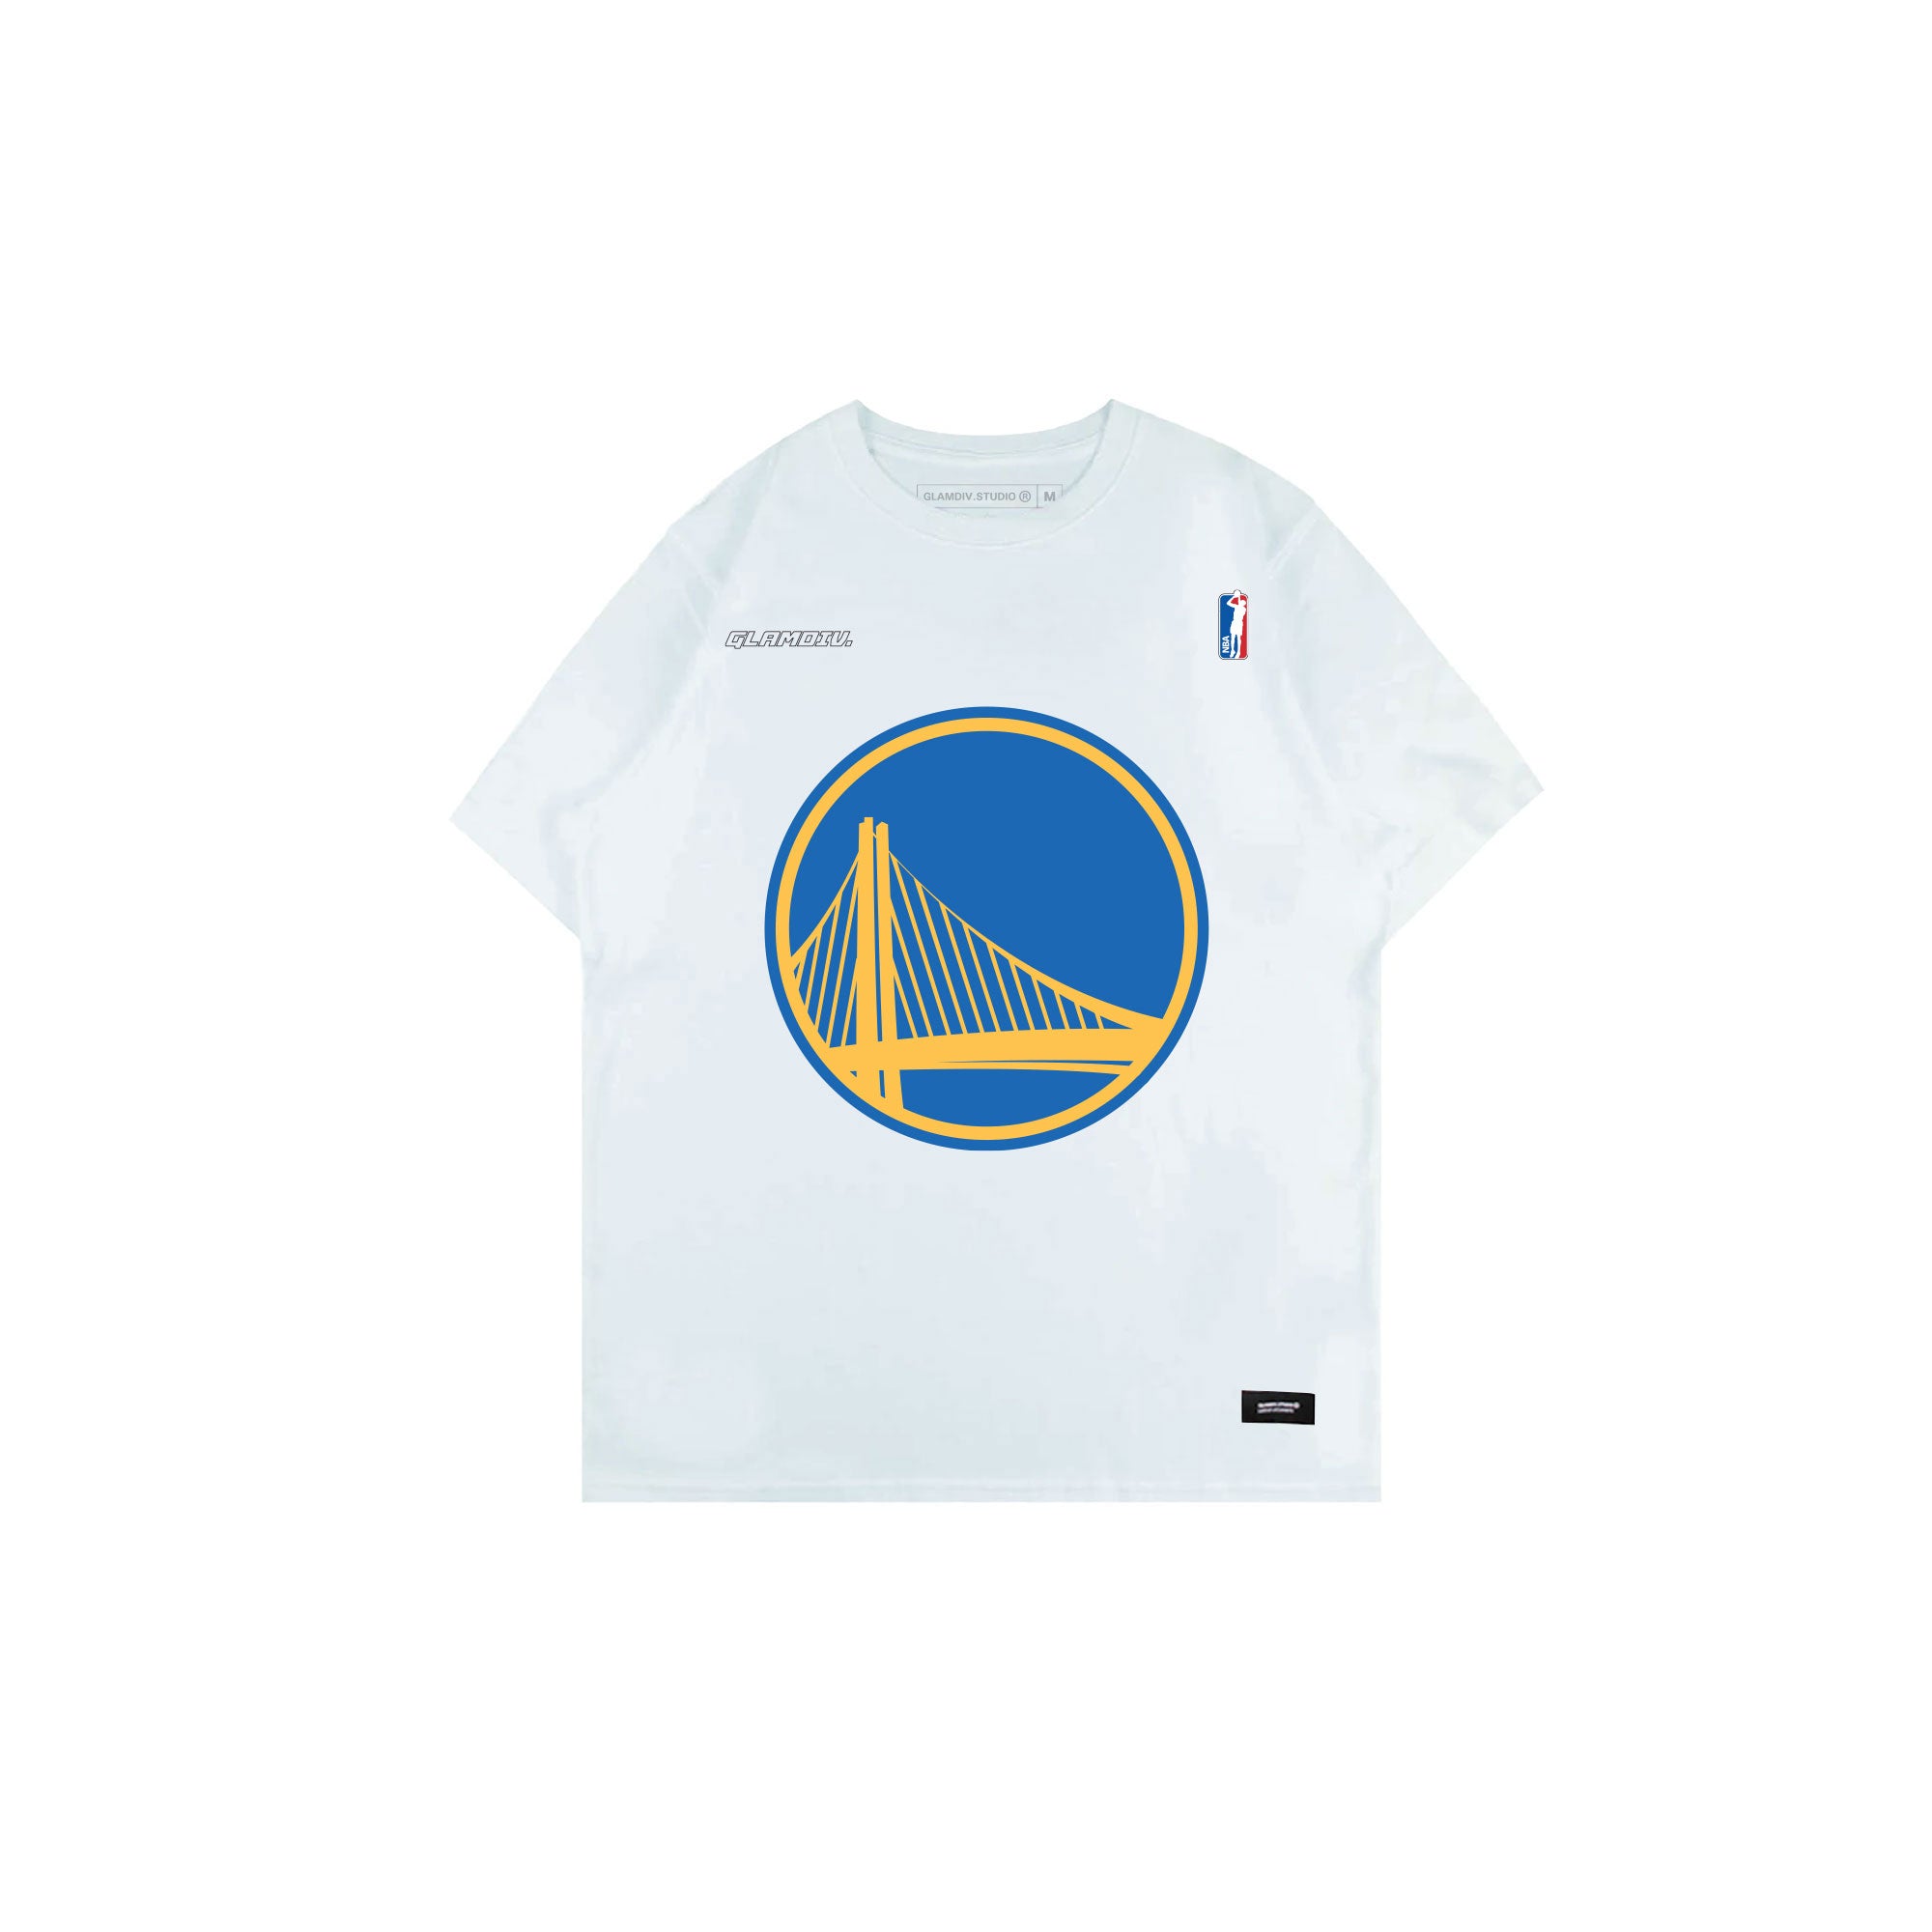 GlamDiv | Curry ICDAT Tee White !